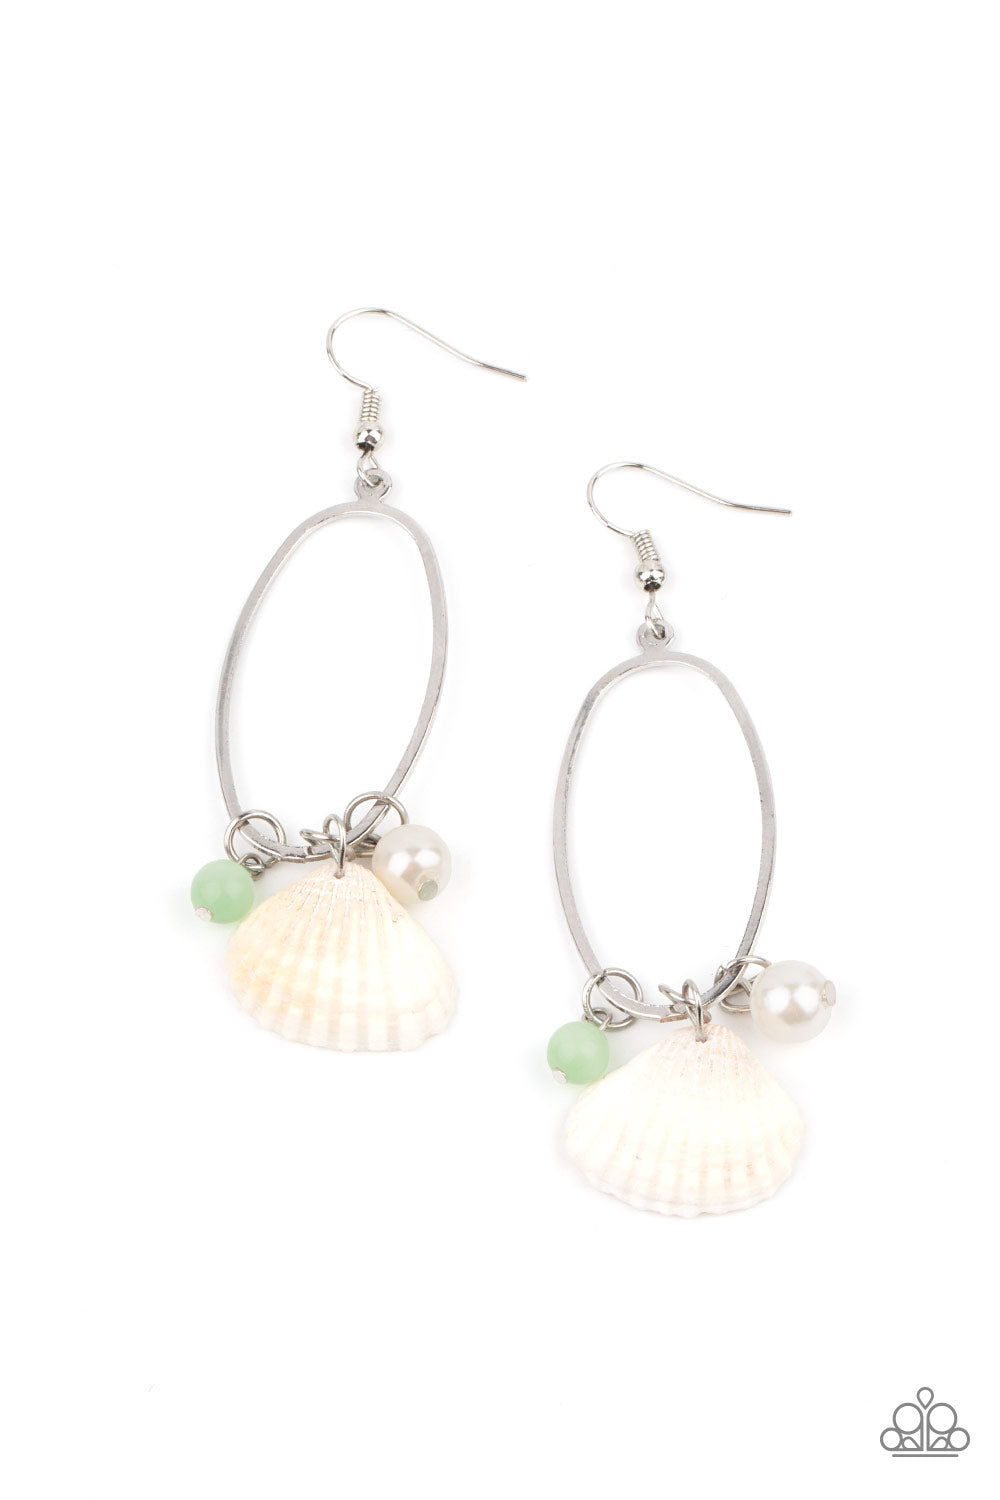 Paparazzi This Too SHELL Pass - Green Earrings - A Finishing Touch Jewelry